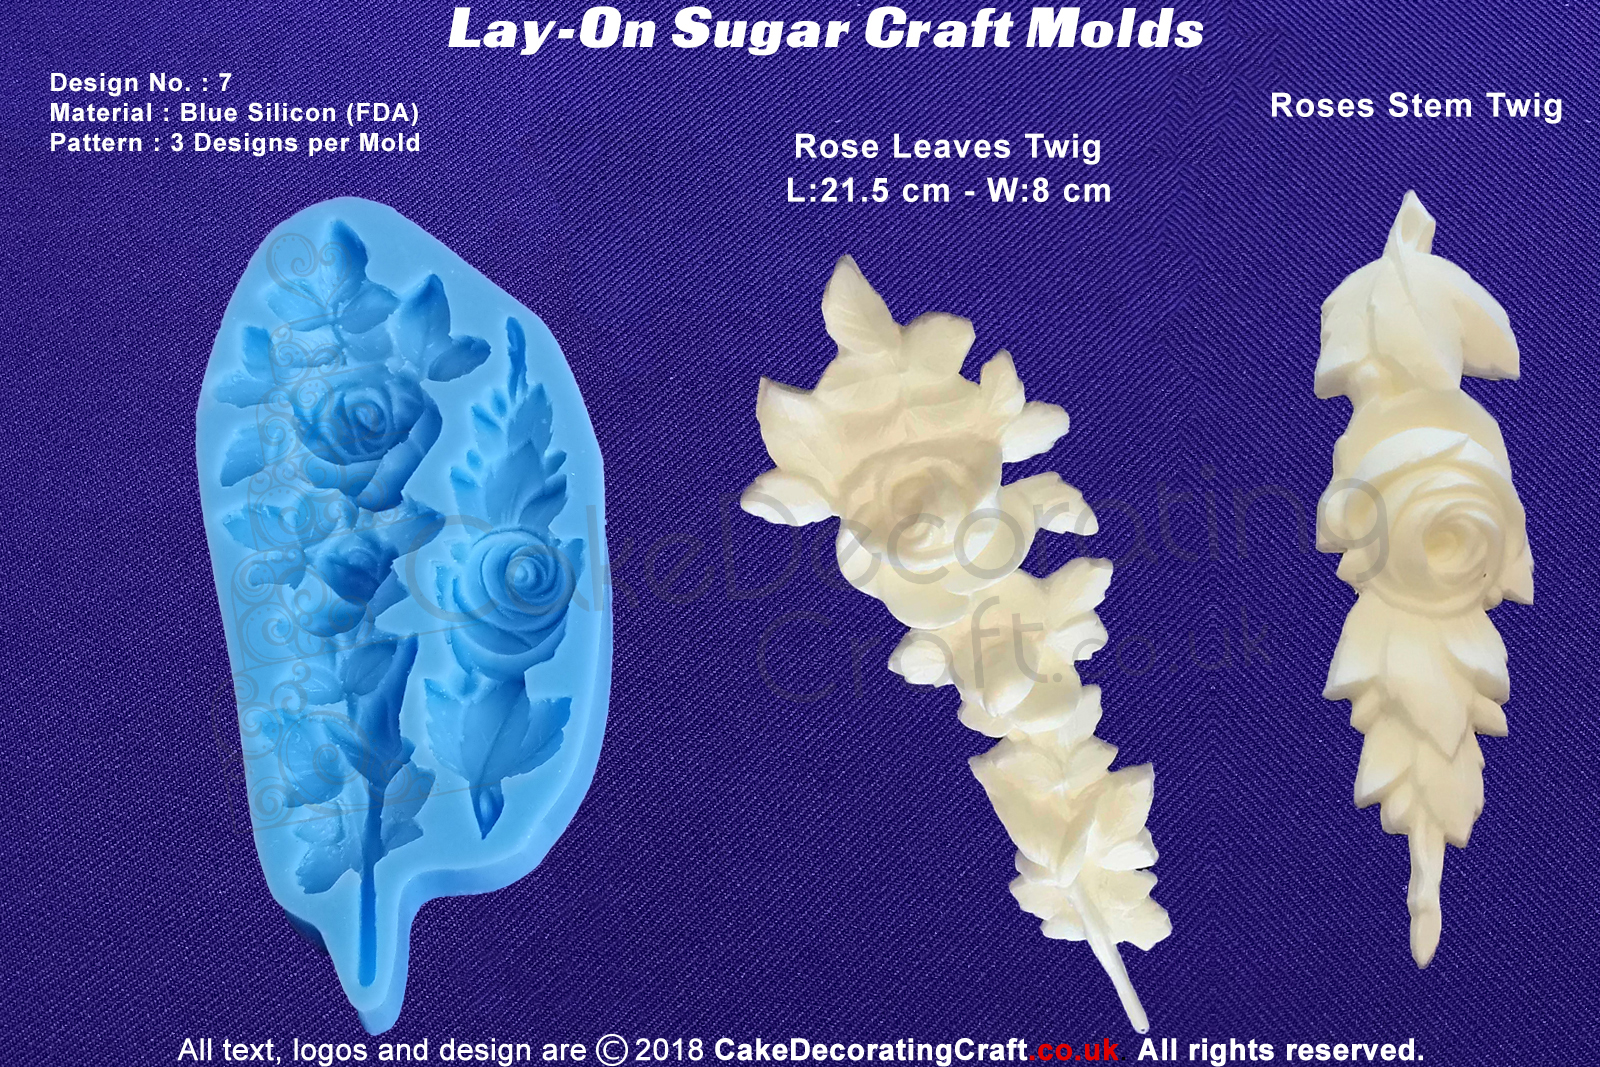 Design 7 | Lay-On Silicone Cake Molds | Deep Floral Roses | Wedding Cakes | Design | Sugar Cake Decorating Craft 